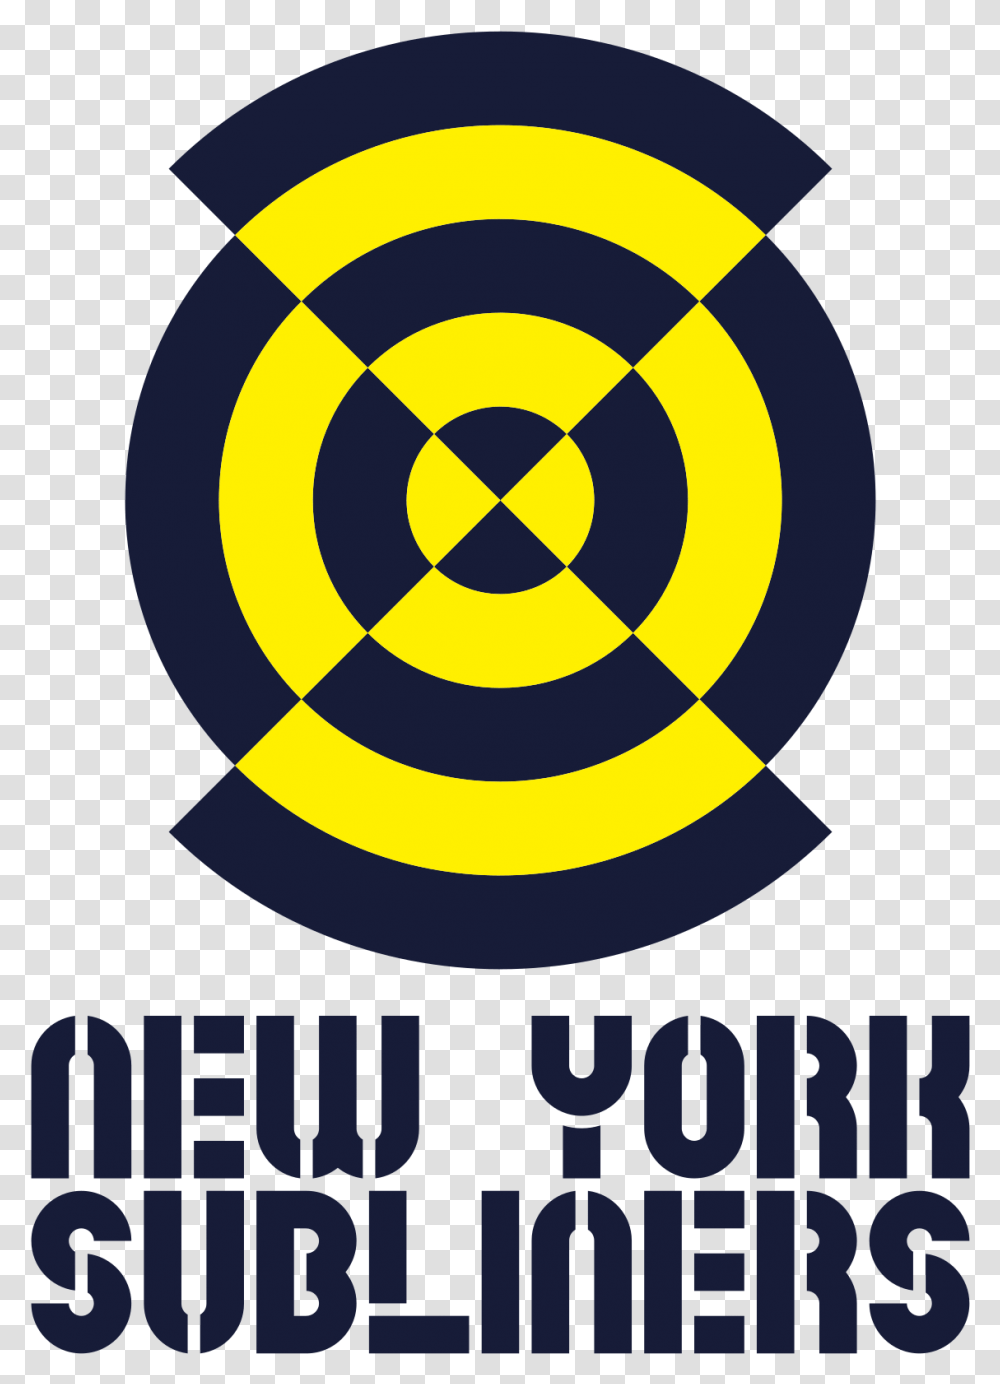 New York Subliners Wikipedia New York Subliners Logo, Symbol, Trademark, Poster, Advertisement Transparent Png